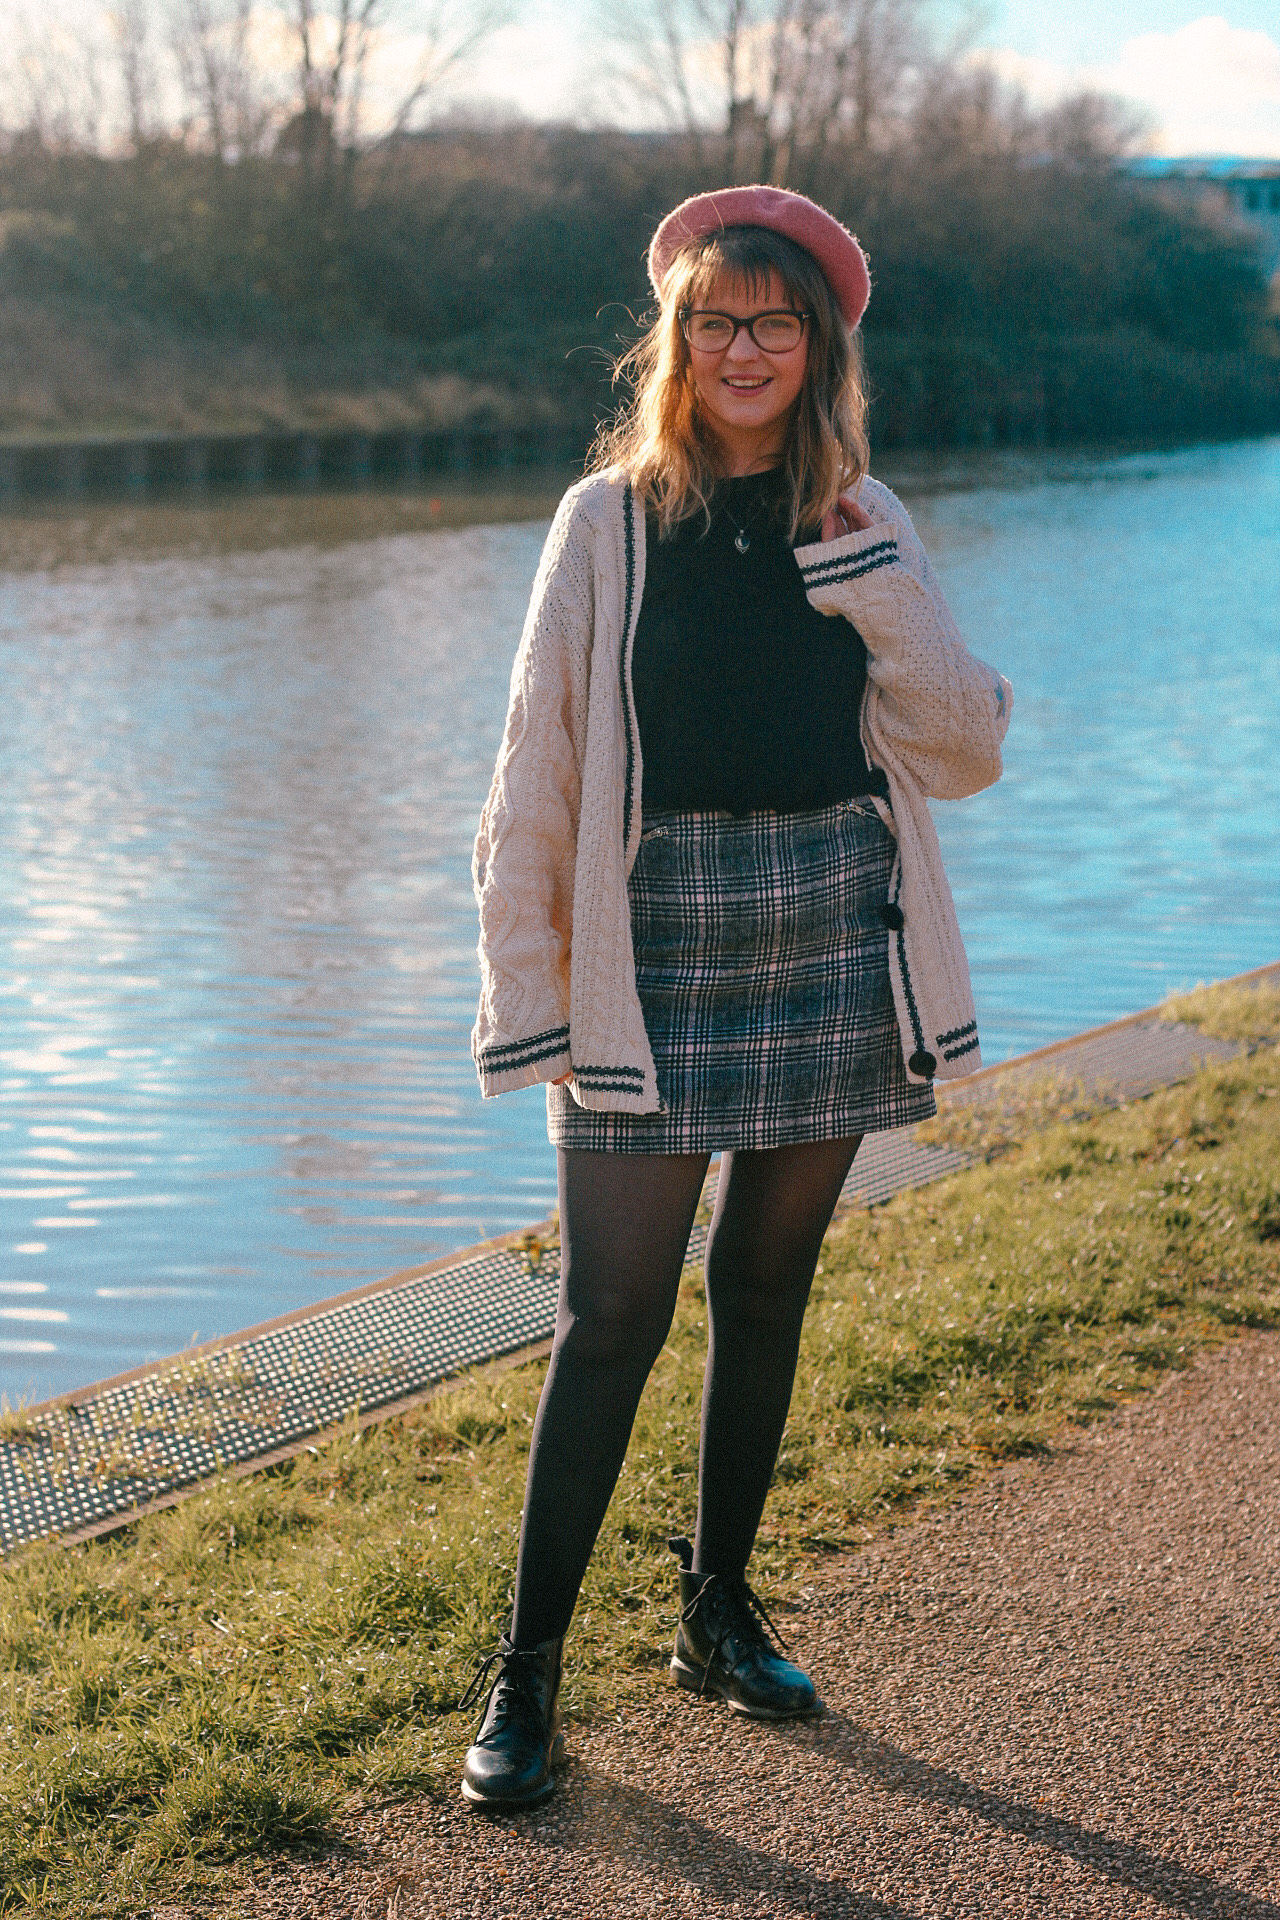 How to improve your wellbeing - little mental tips blogpost. Blogger girl chloe harriets in pink beret.